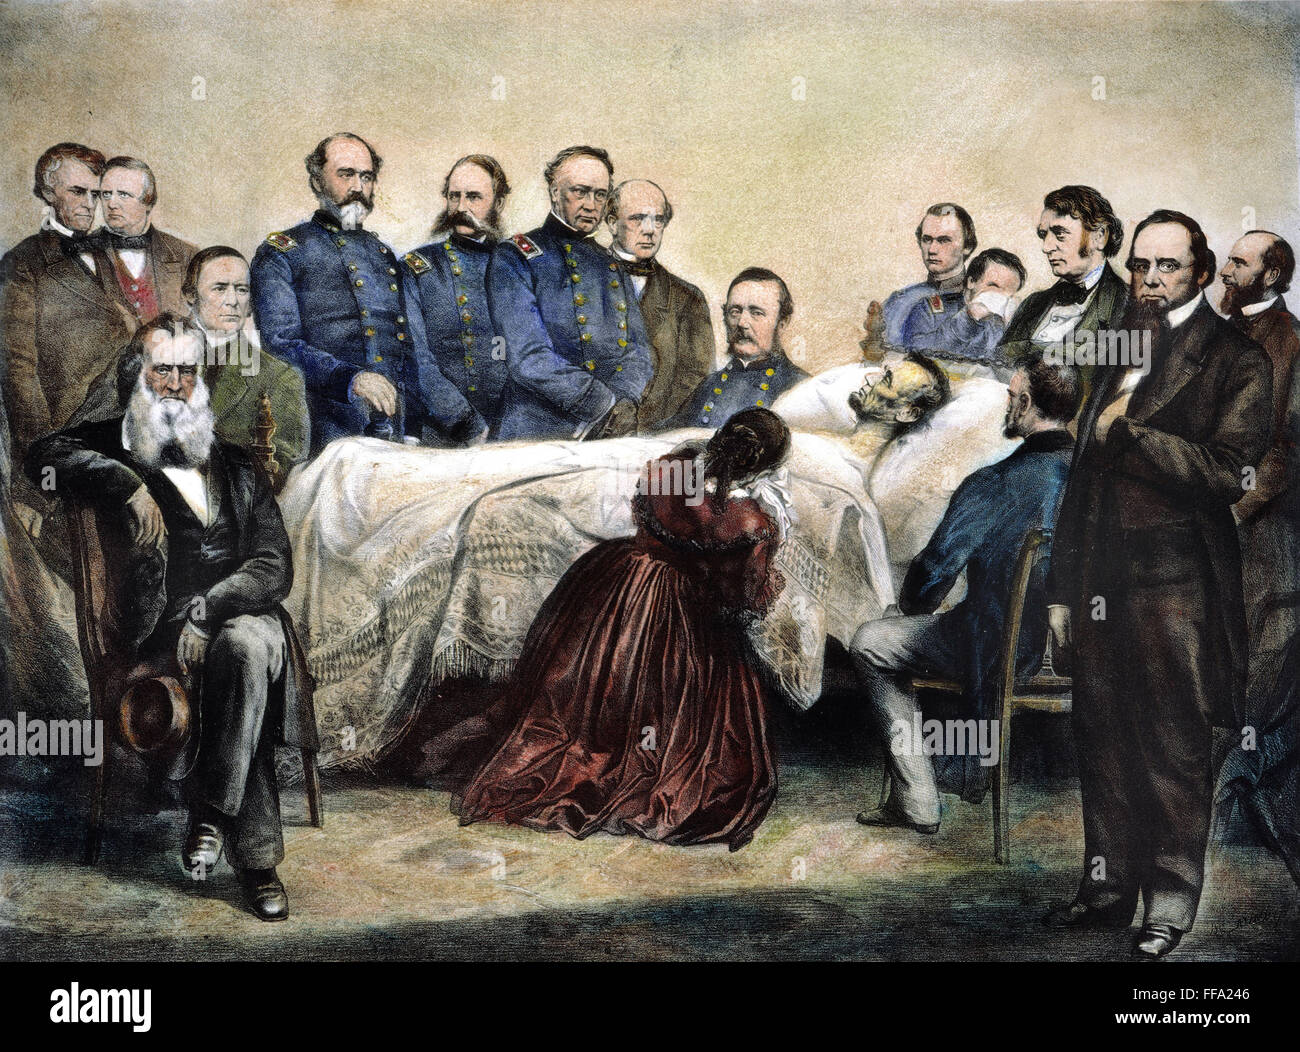 DEATH OF LINCOLN, 1865. /nThe deathbed of President Abraham Lincoln, Washington, D.C., 15 April 1865. Lithograph, American, 1865. Stock Photo